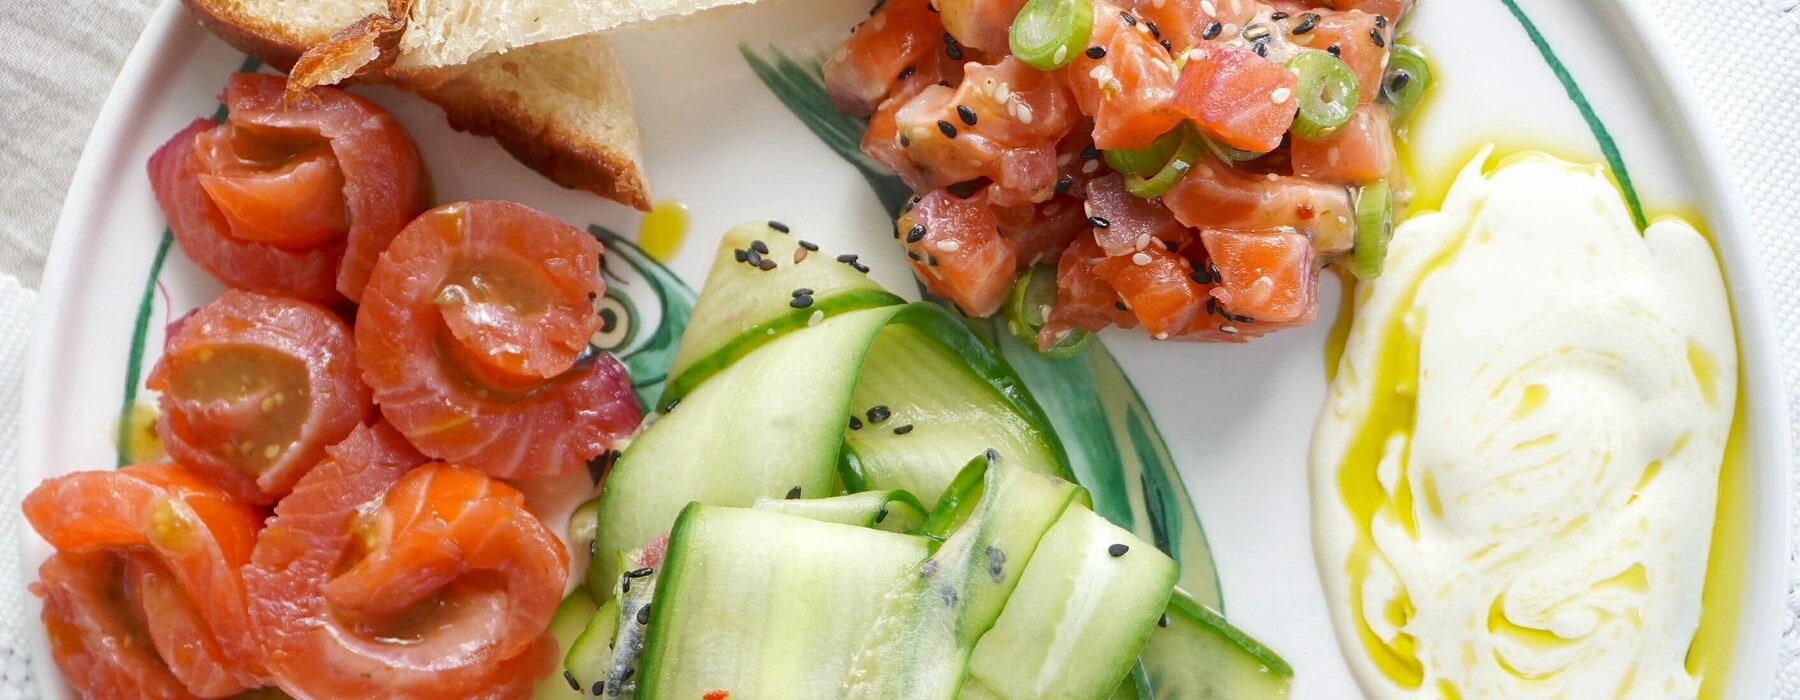 Plum & Gin Cured Salmon with Cucumber Salad